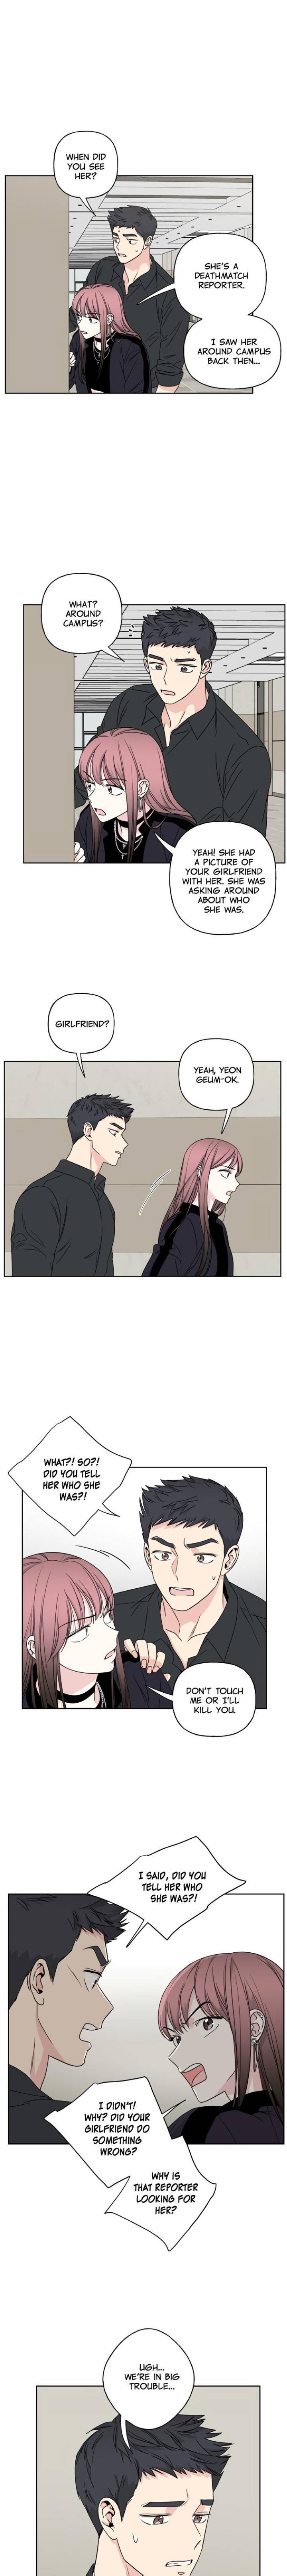 mother-im-sorry-chap-24-8